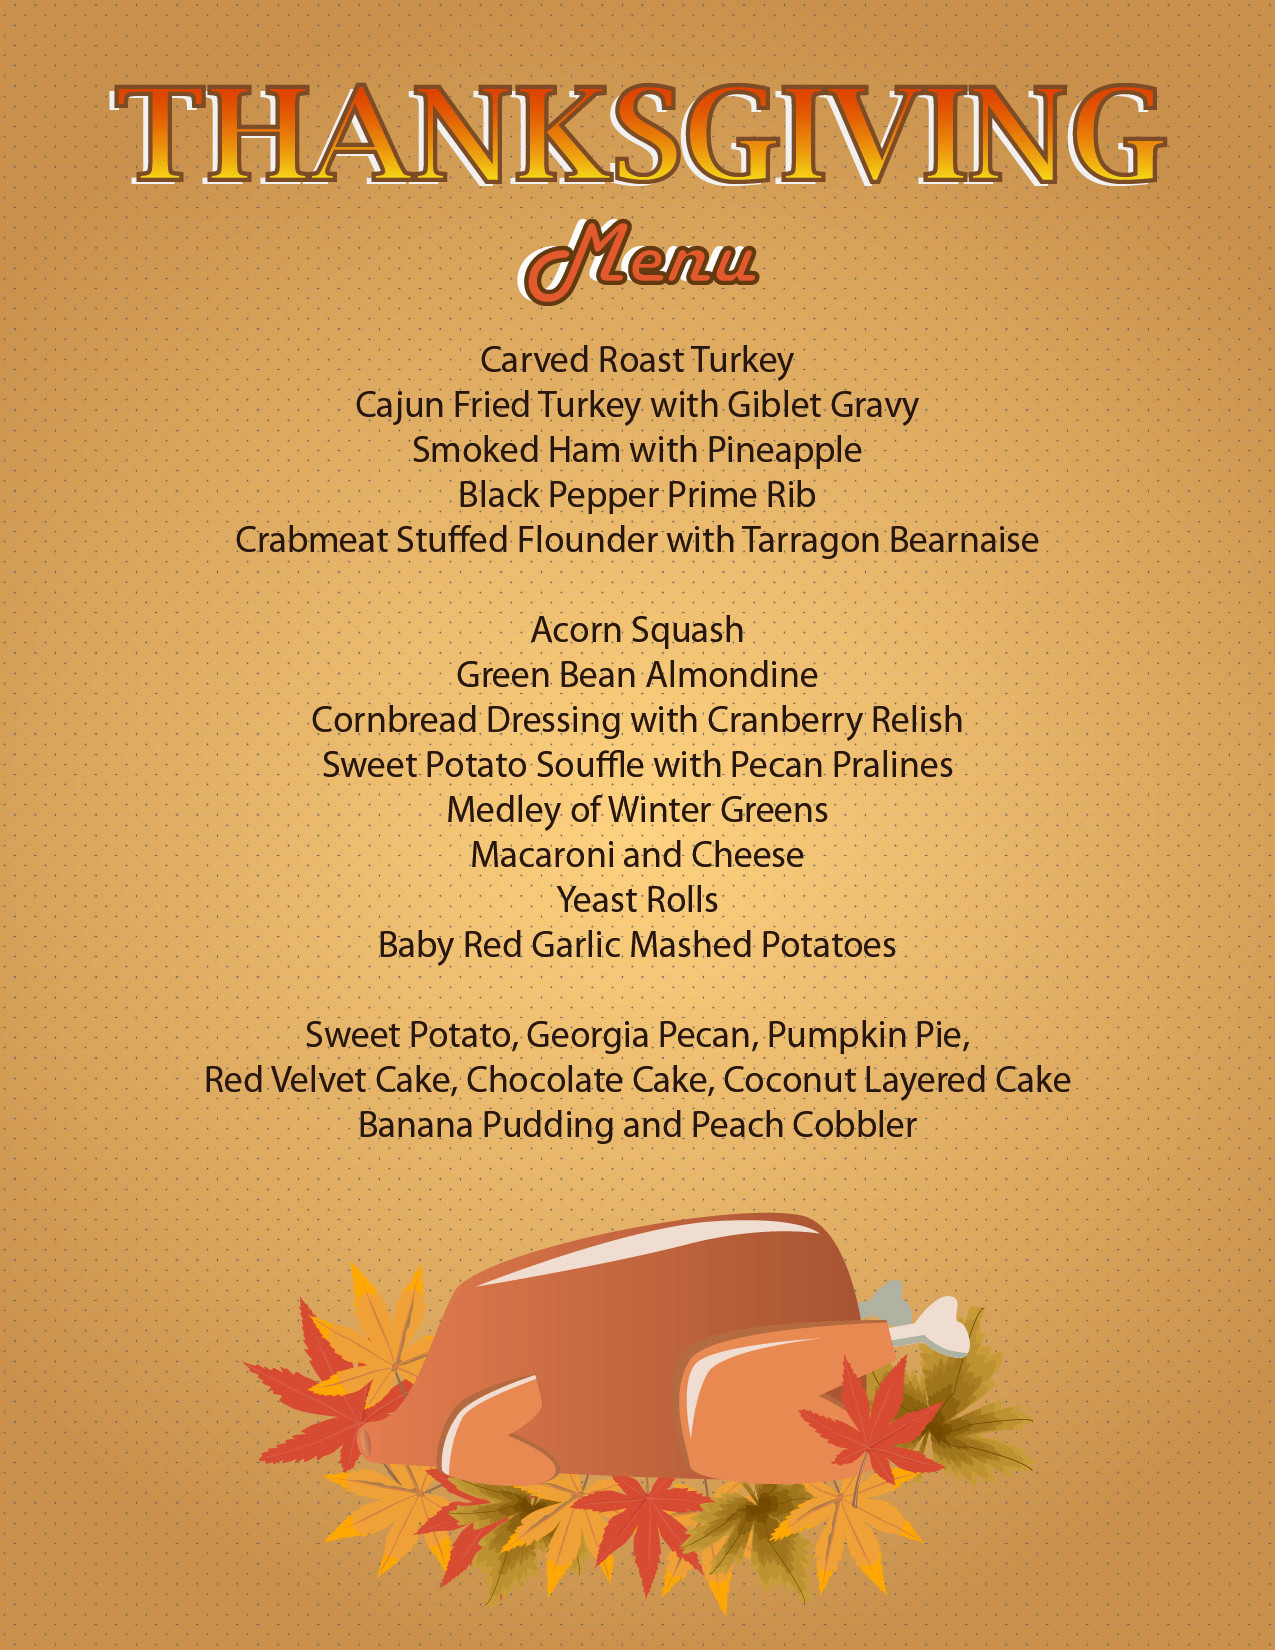 The top 30 Ideas About Thanksgiving Dinner Menu Most Popular Ideas of